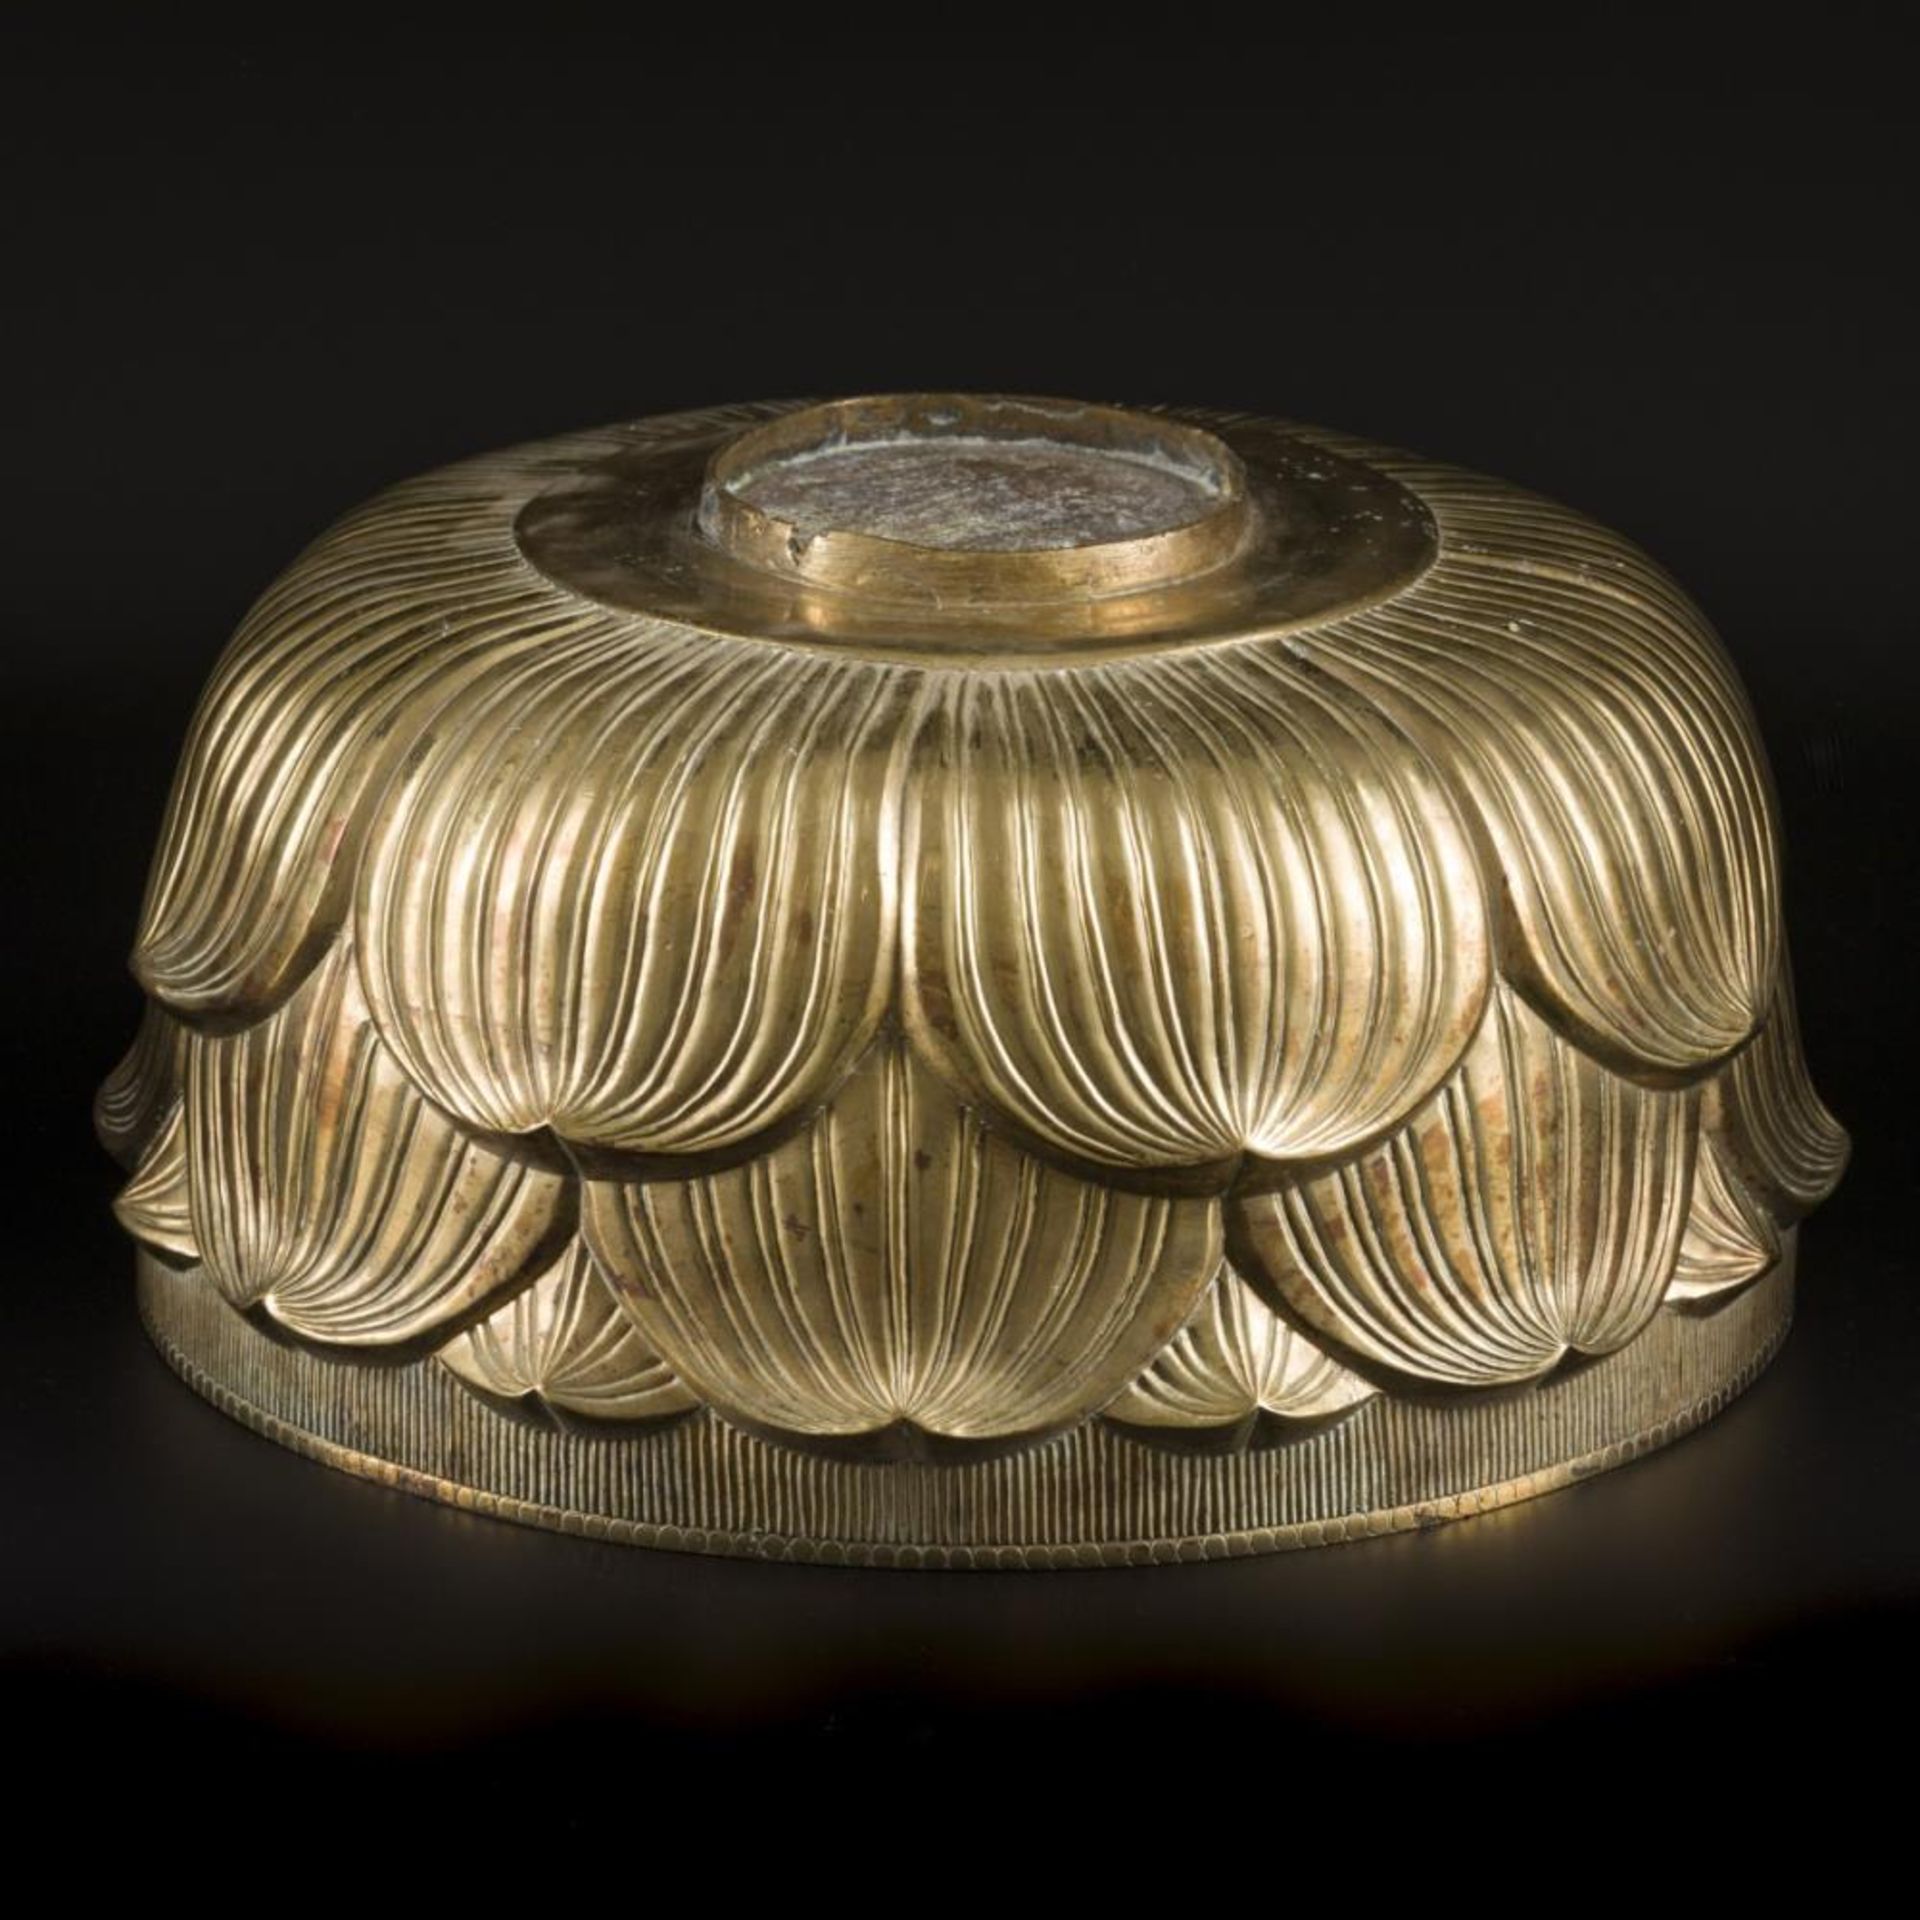 A brass lotus-shaped bowl, China, early 20th century. - Image 3 of 6